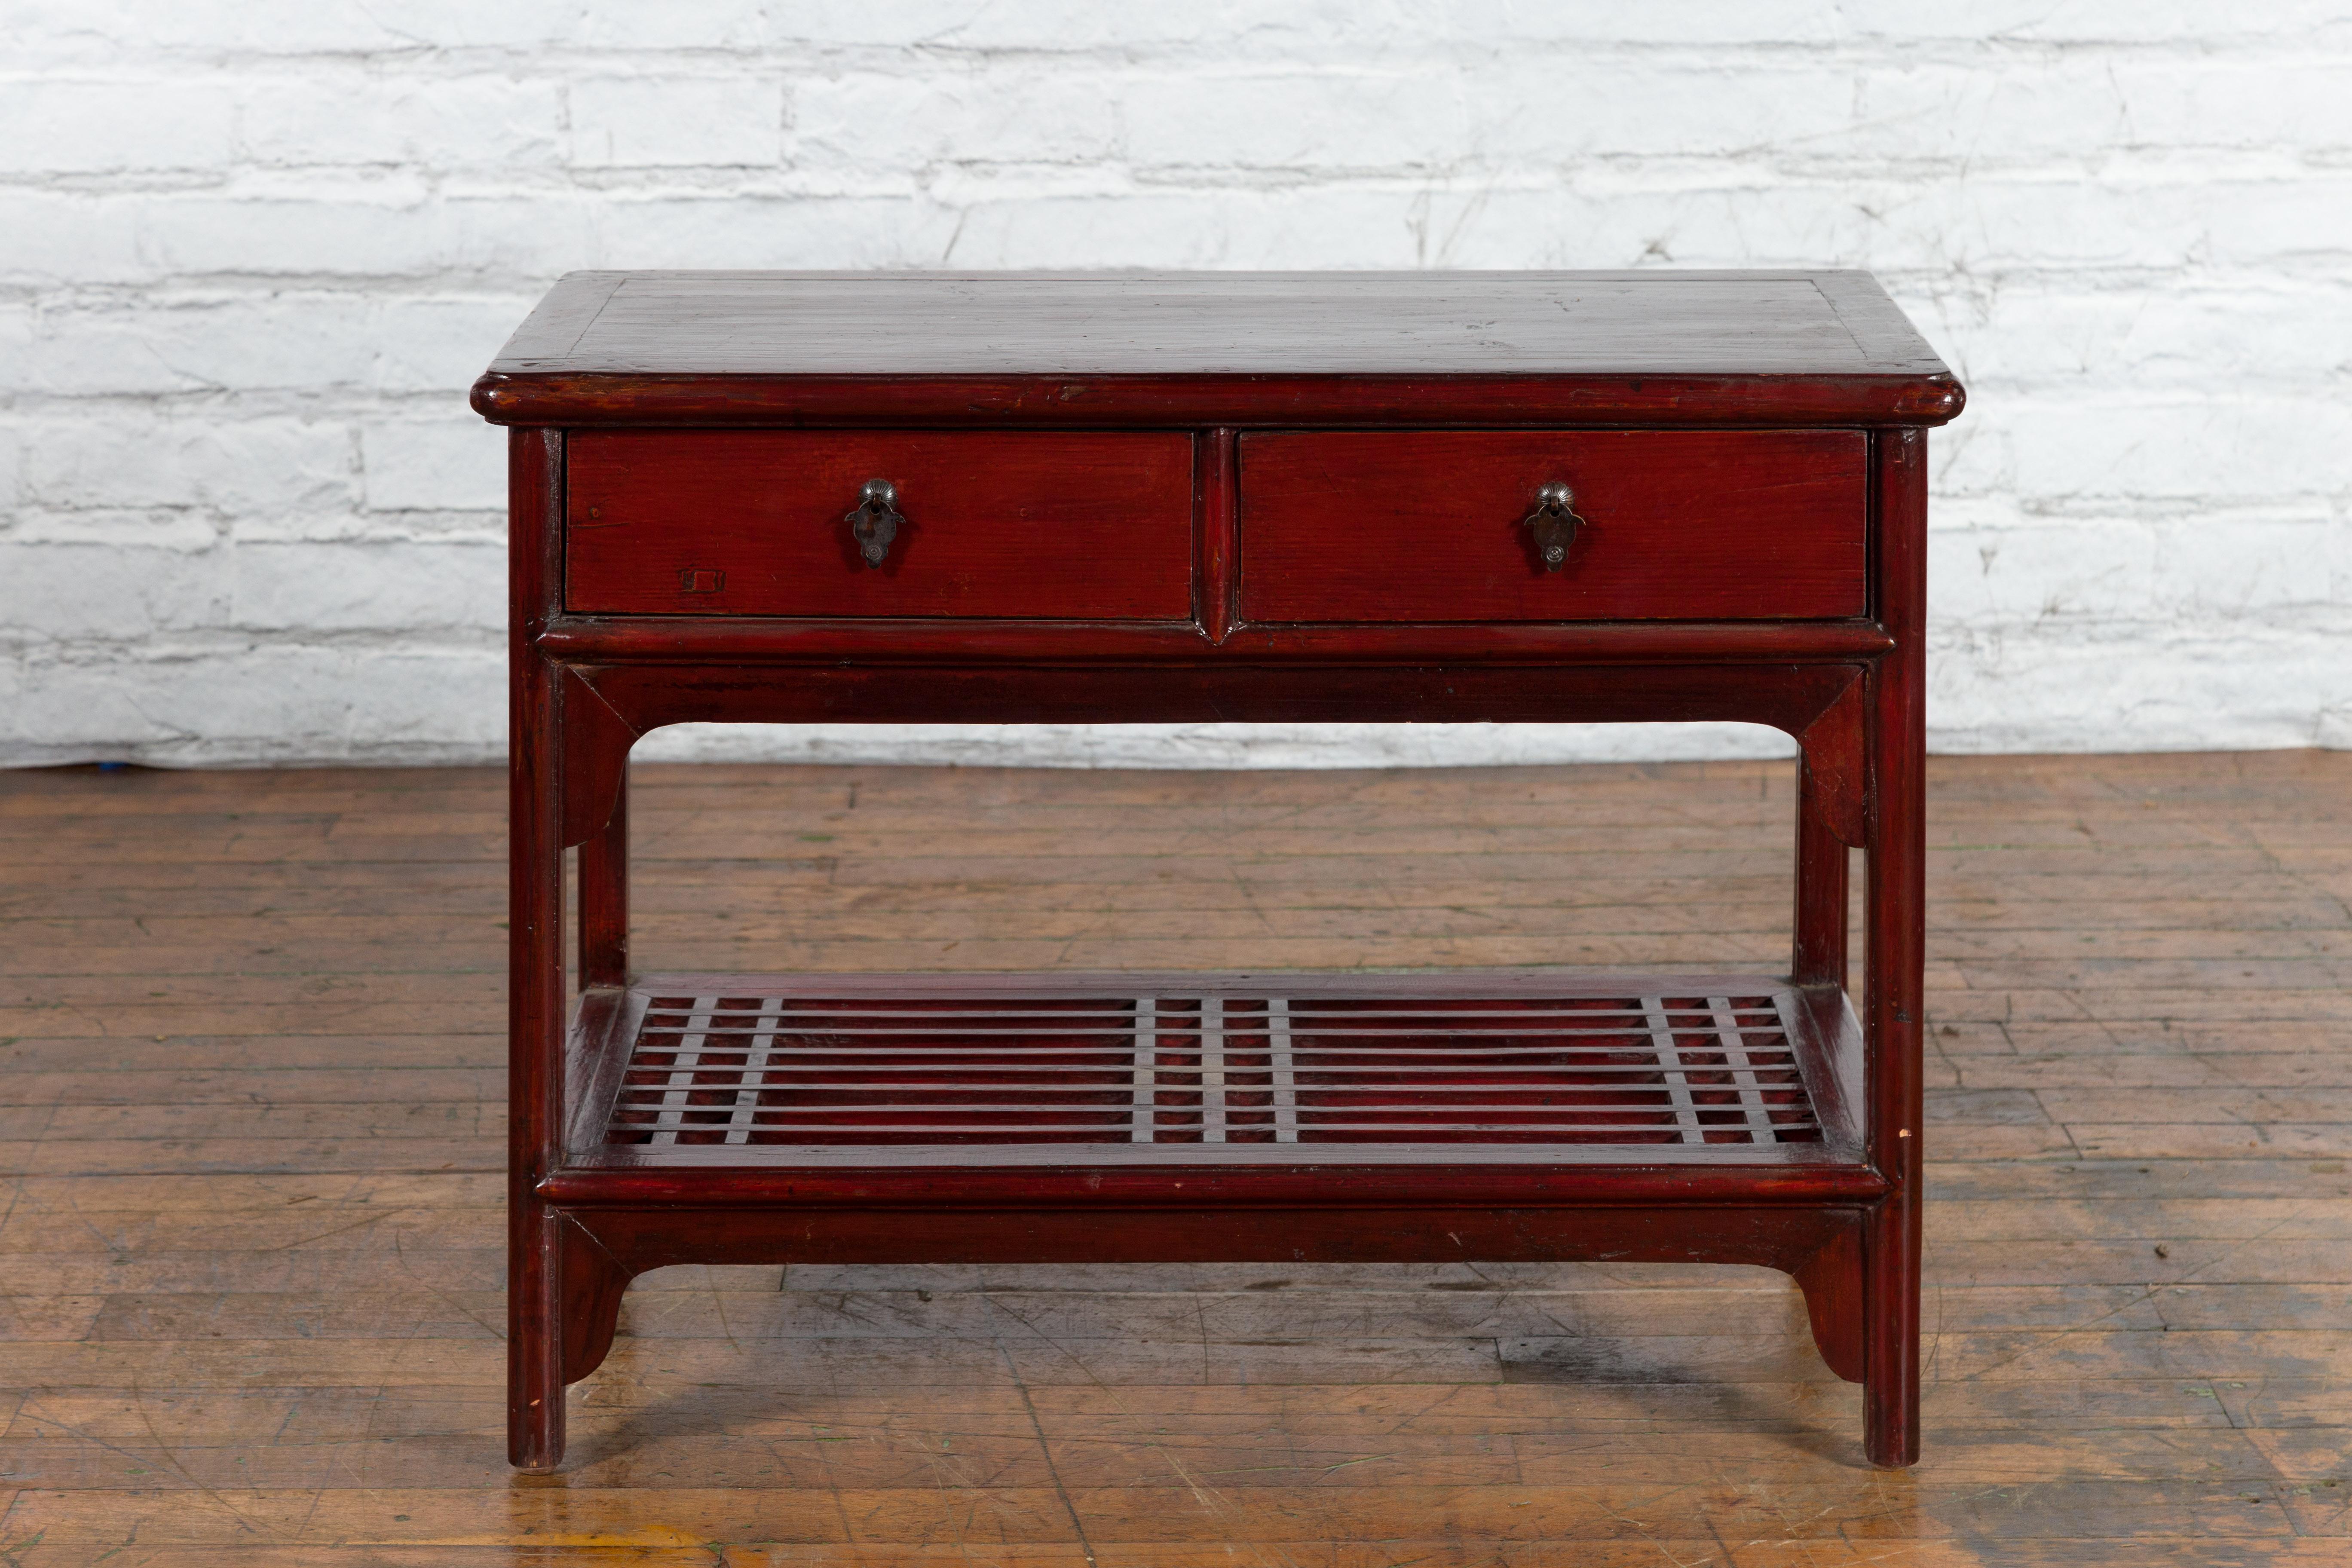 A vintage Chinese oxblood color side table from the mid 20th century with fretwork shelf, two drawers and shaped pulls. Created in China during the Midcentury period, this vintage lacquered side table features a rectangular top with central board